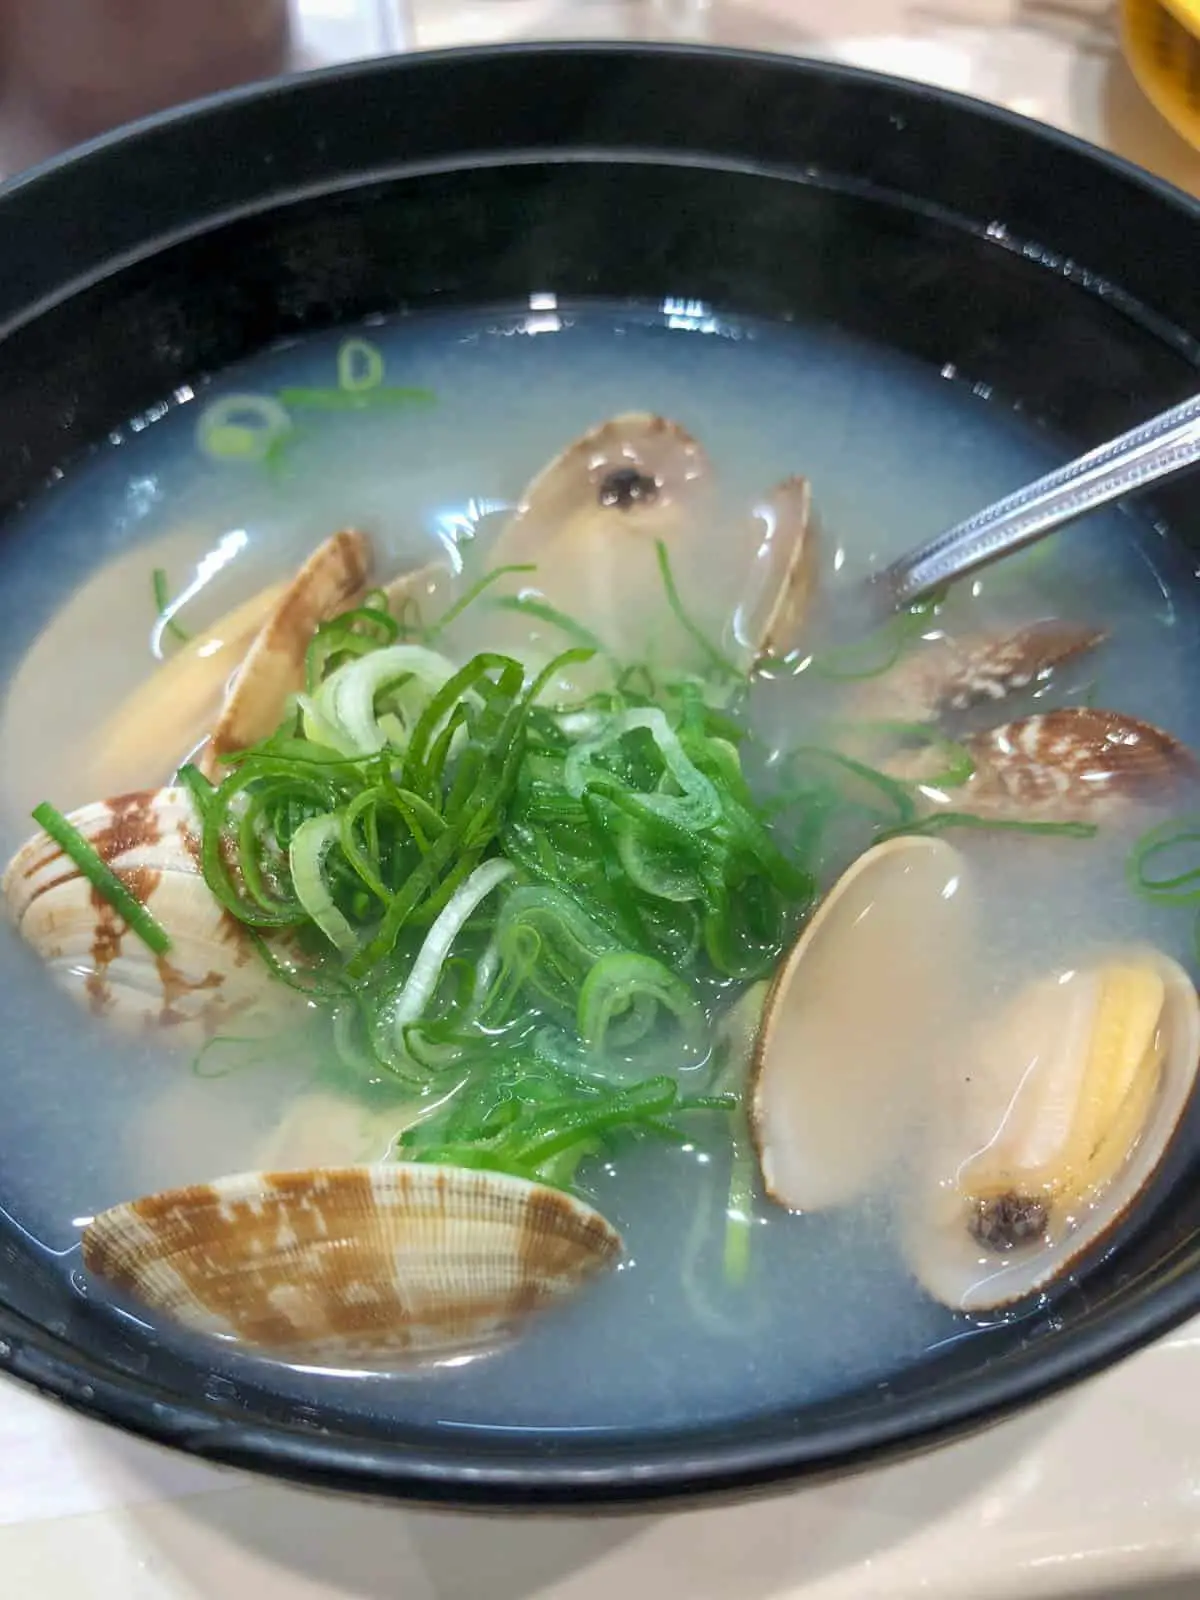 A black bowl containing miso soup with clams and garnished with green onions. There is a spoon resting in the bowl.